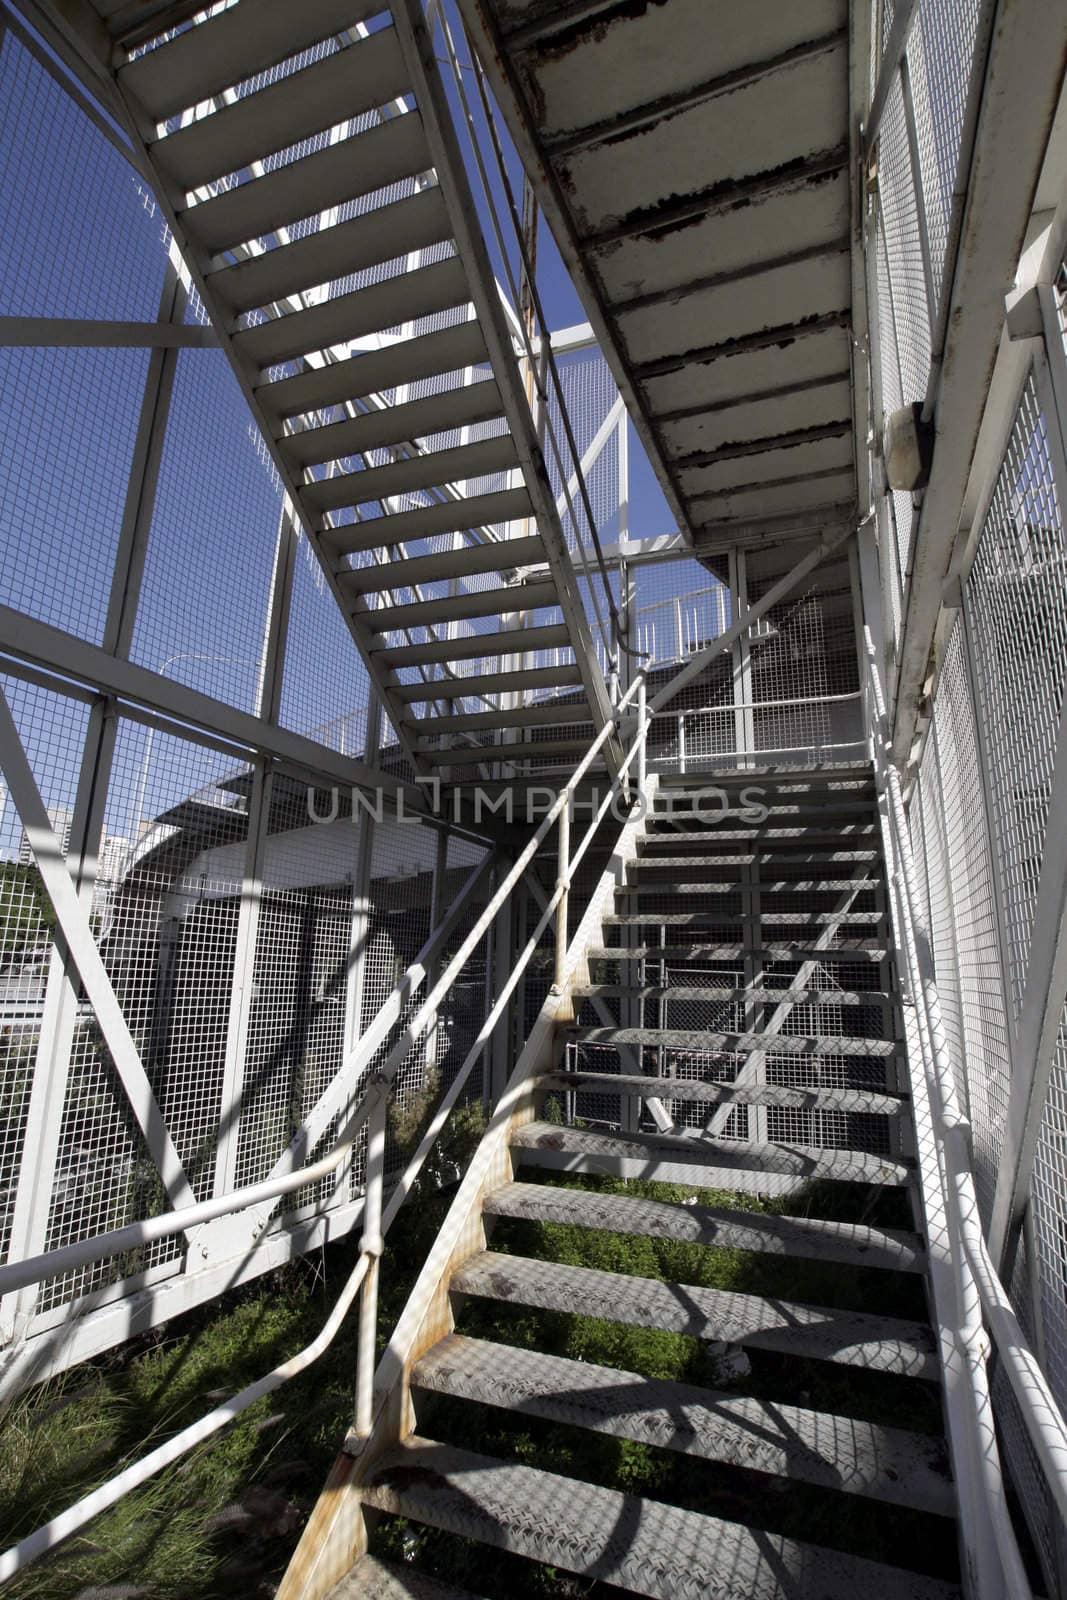 Urban Metal Stairs With Chain-Wire Fence, Clear Blue Sky, Summer Day